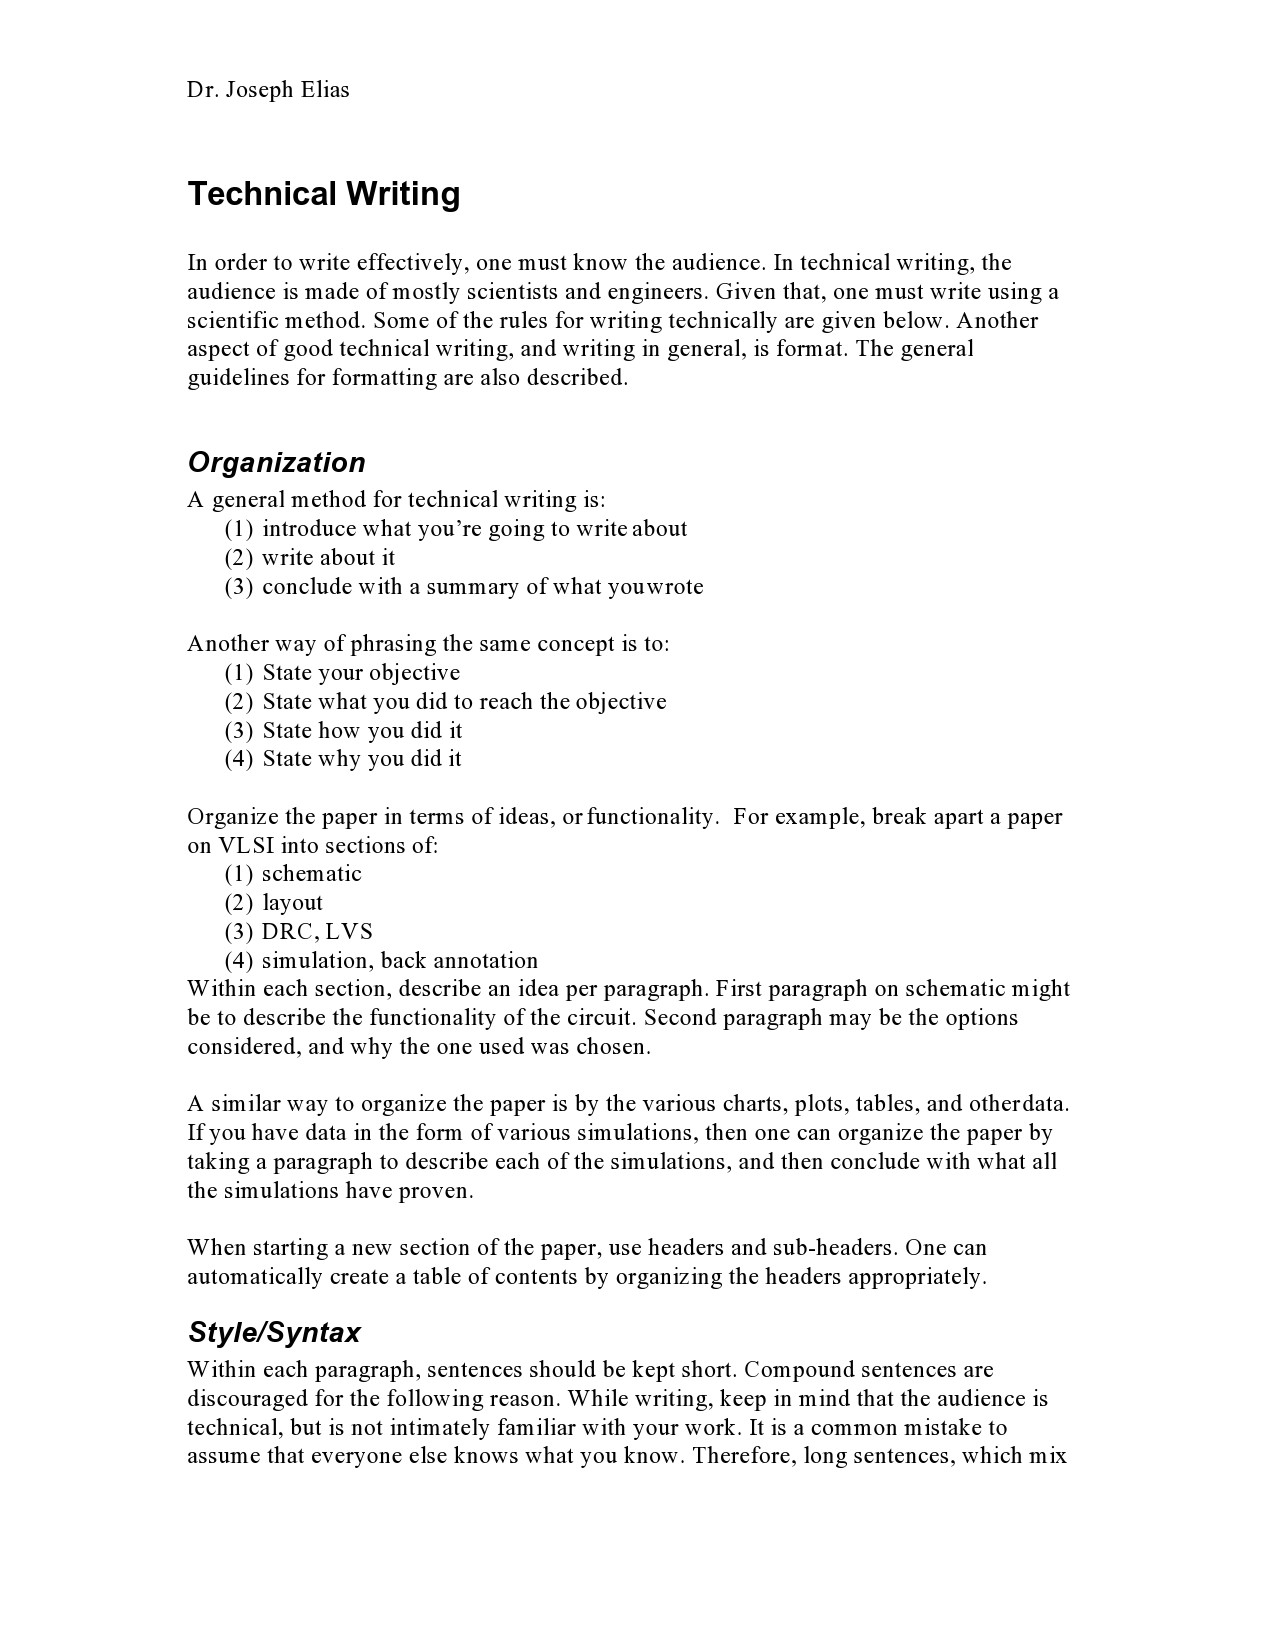 technical writing assignment topics